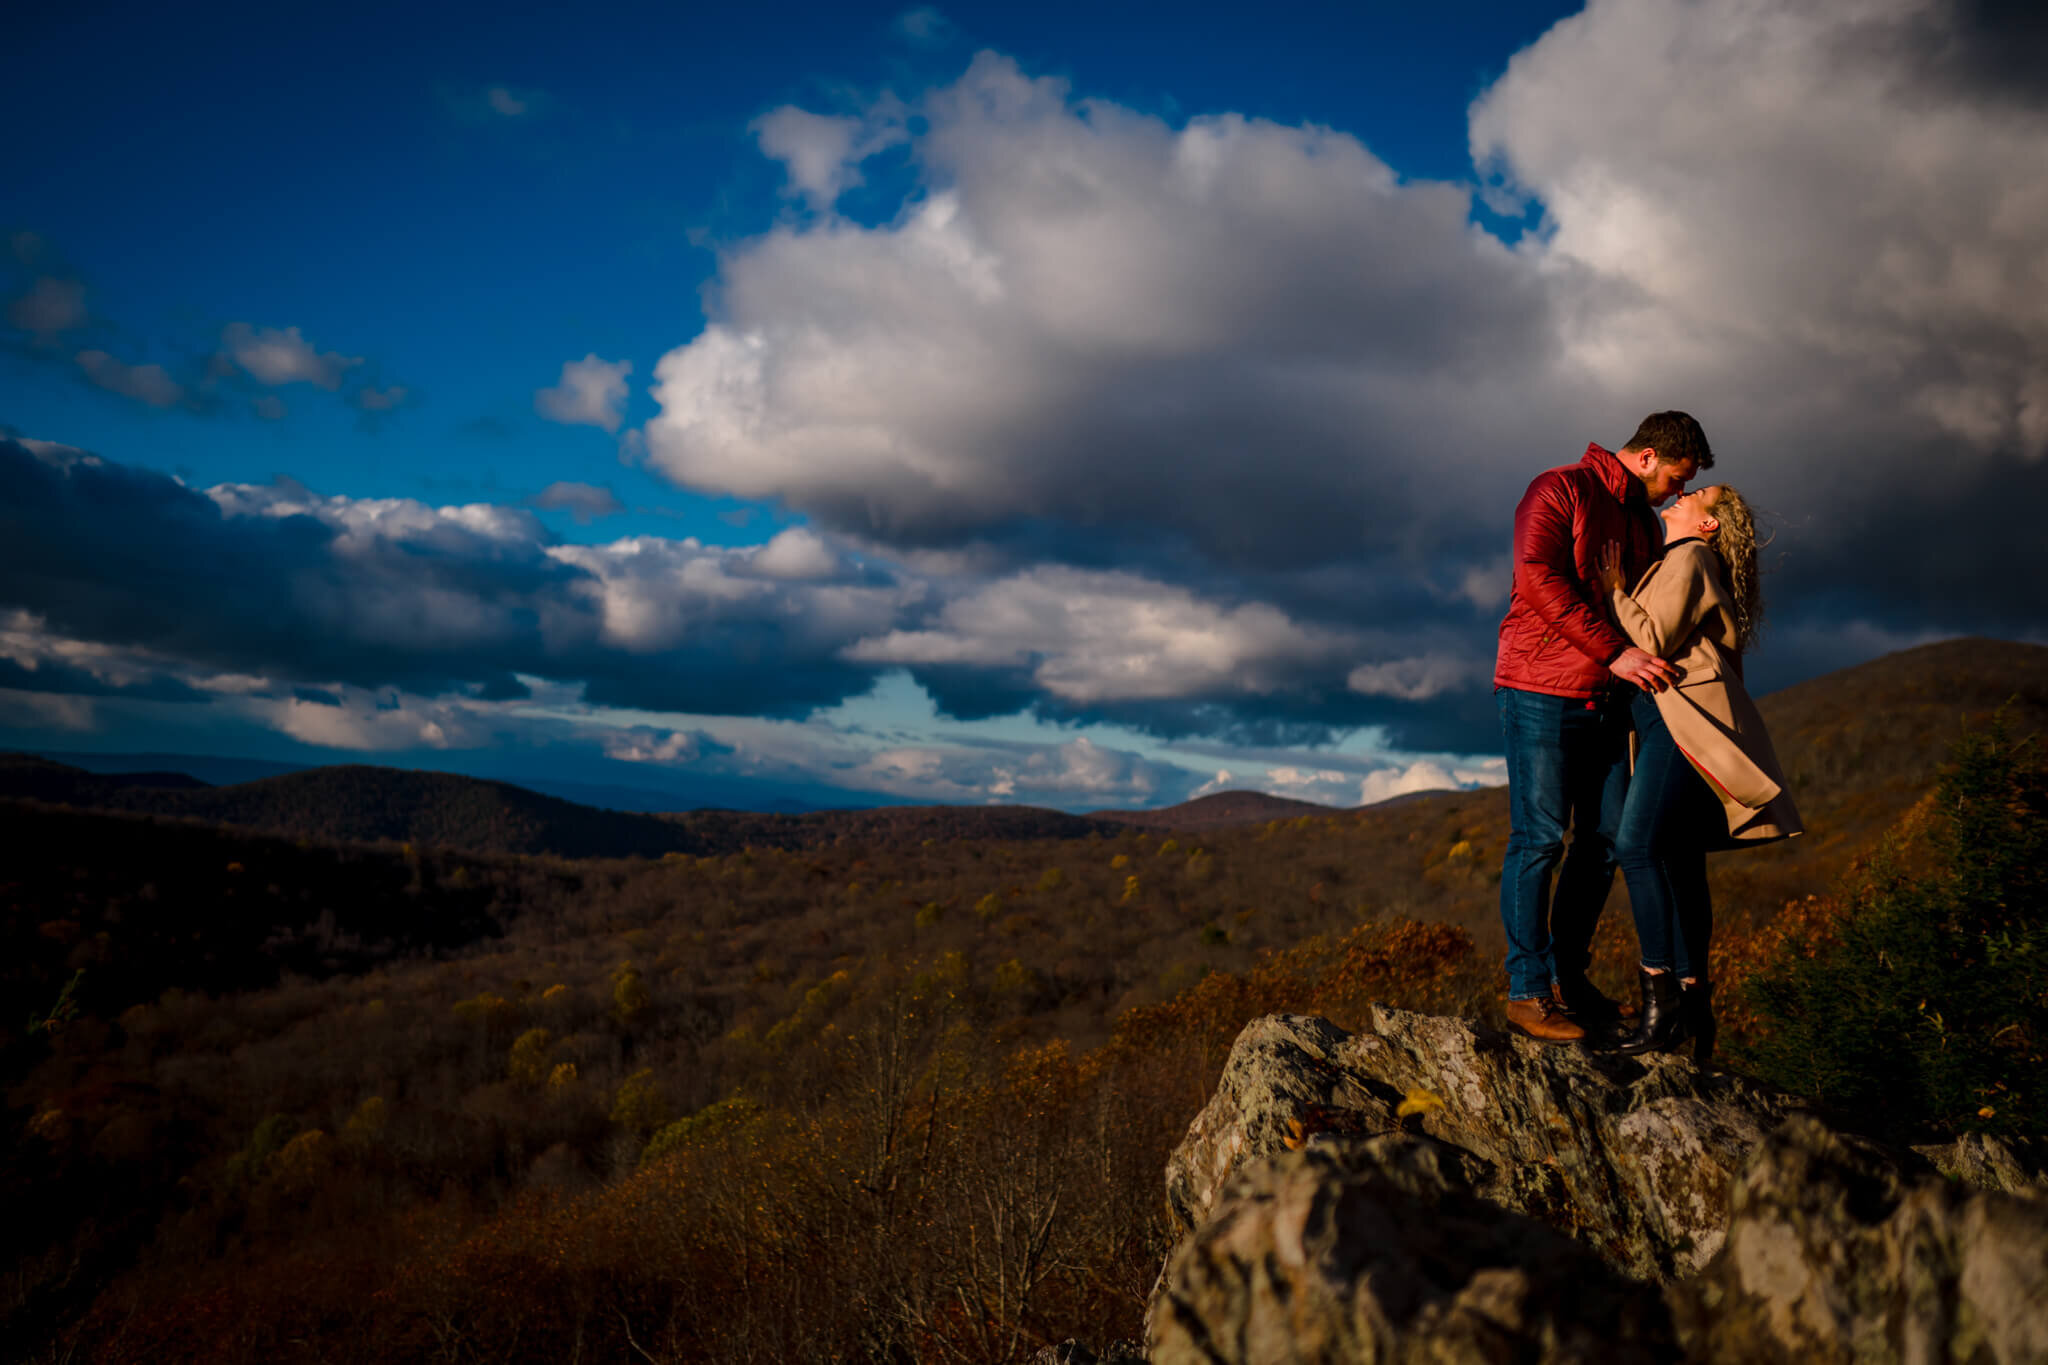 Surprise-Proposal-The-Point-Overlook-Shenandoah-National-Park-Photography-by-Bee-Two-Sweet-69.jpg